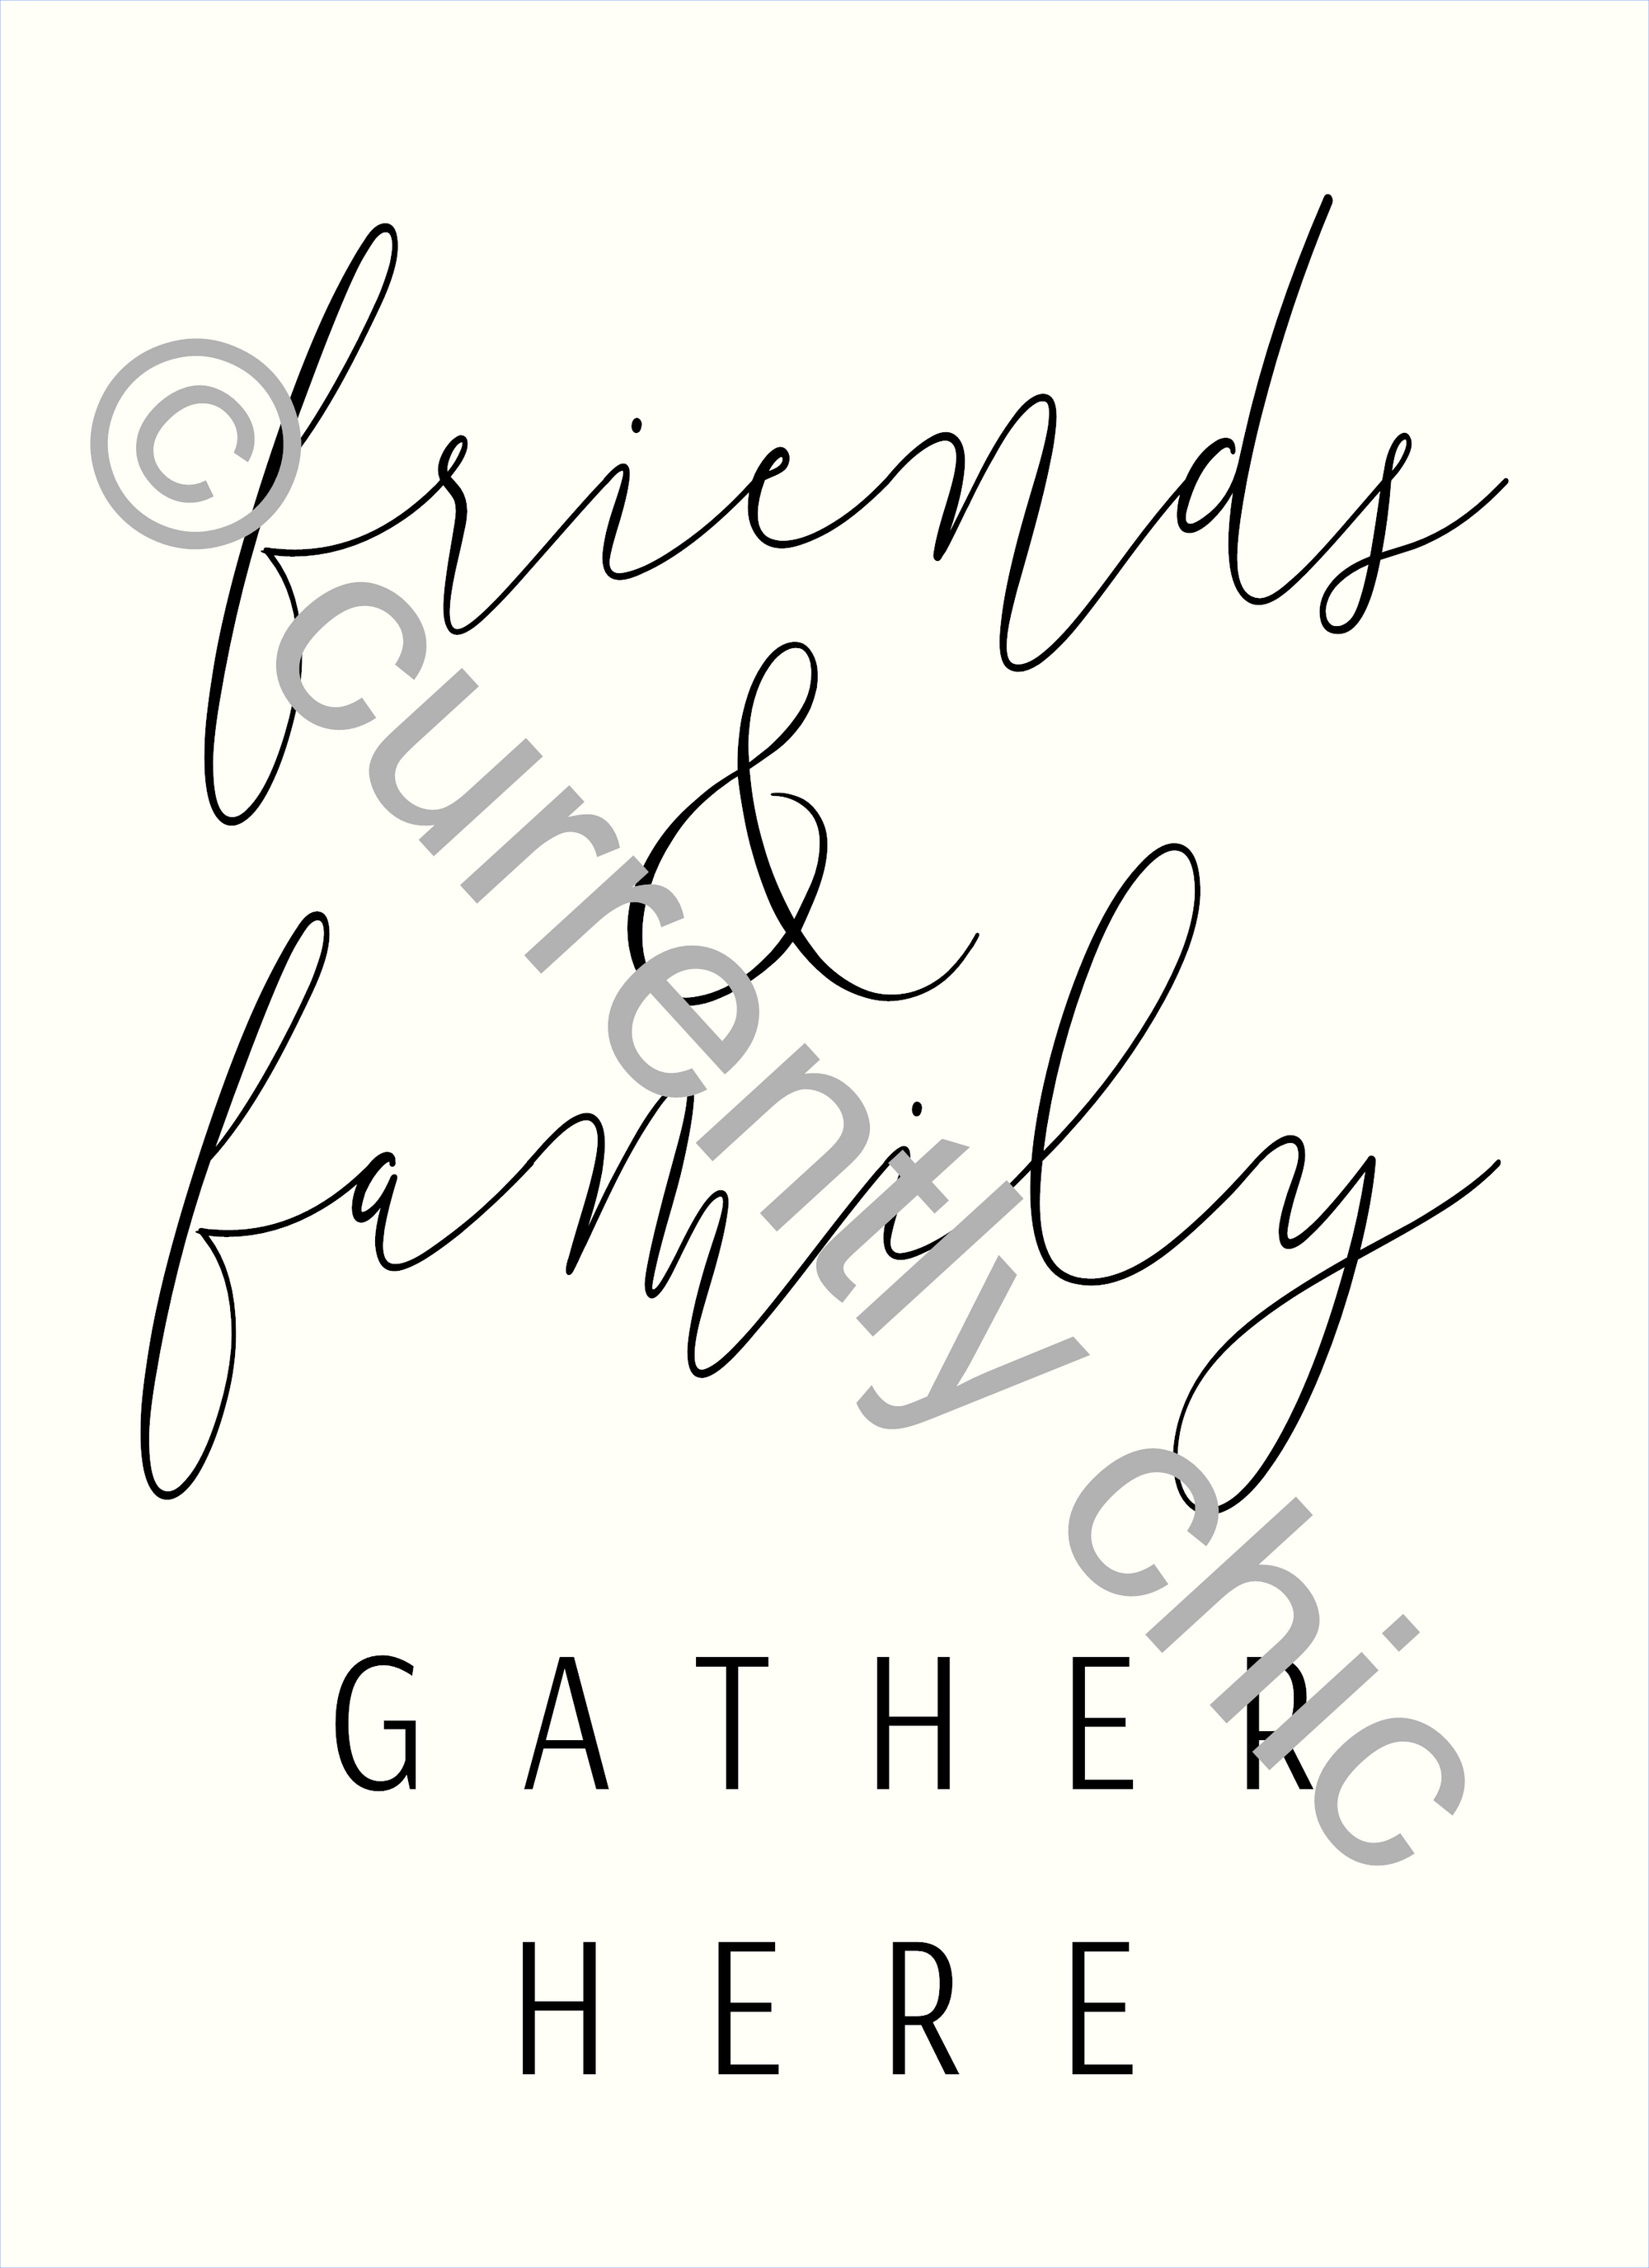 Friends And Family Gather Here Canvas Printed Sign